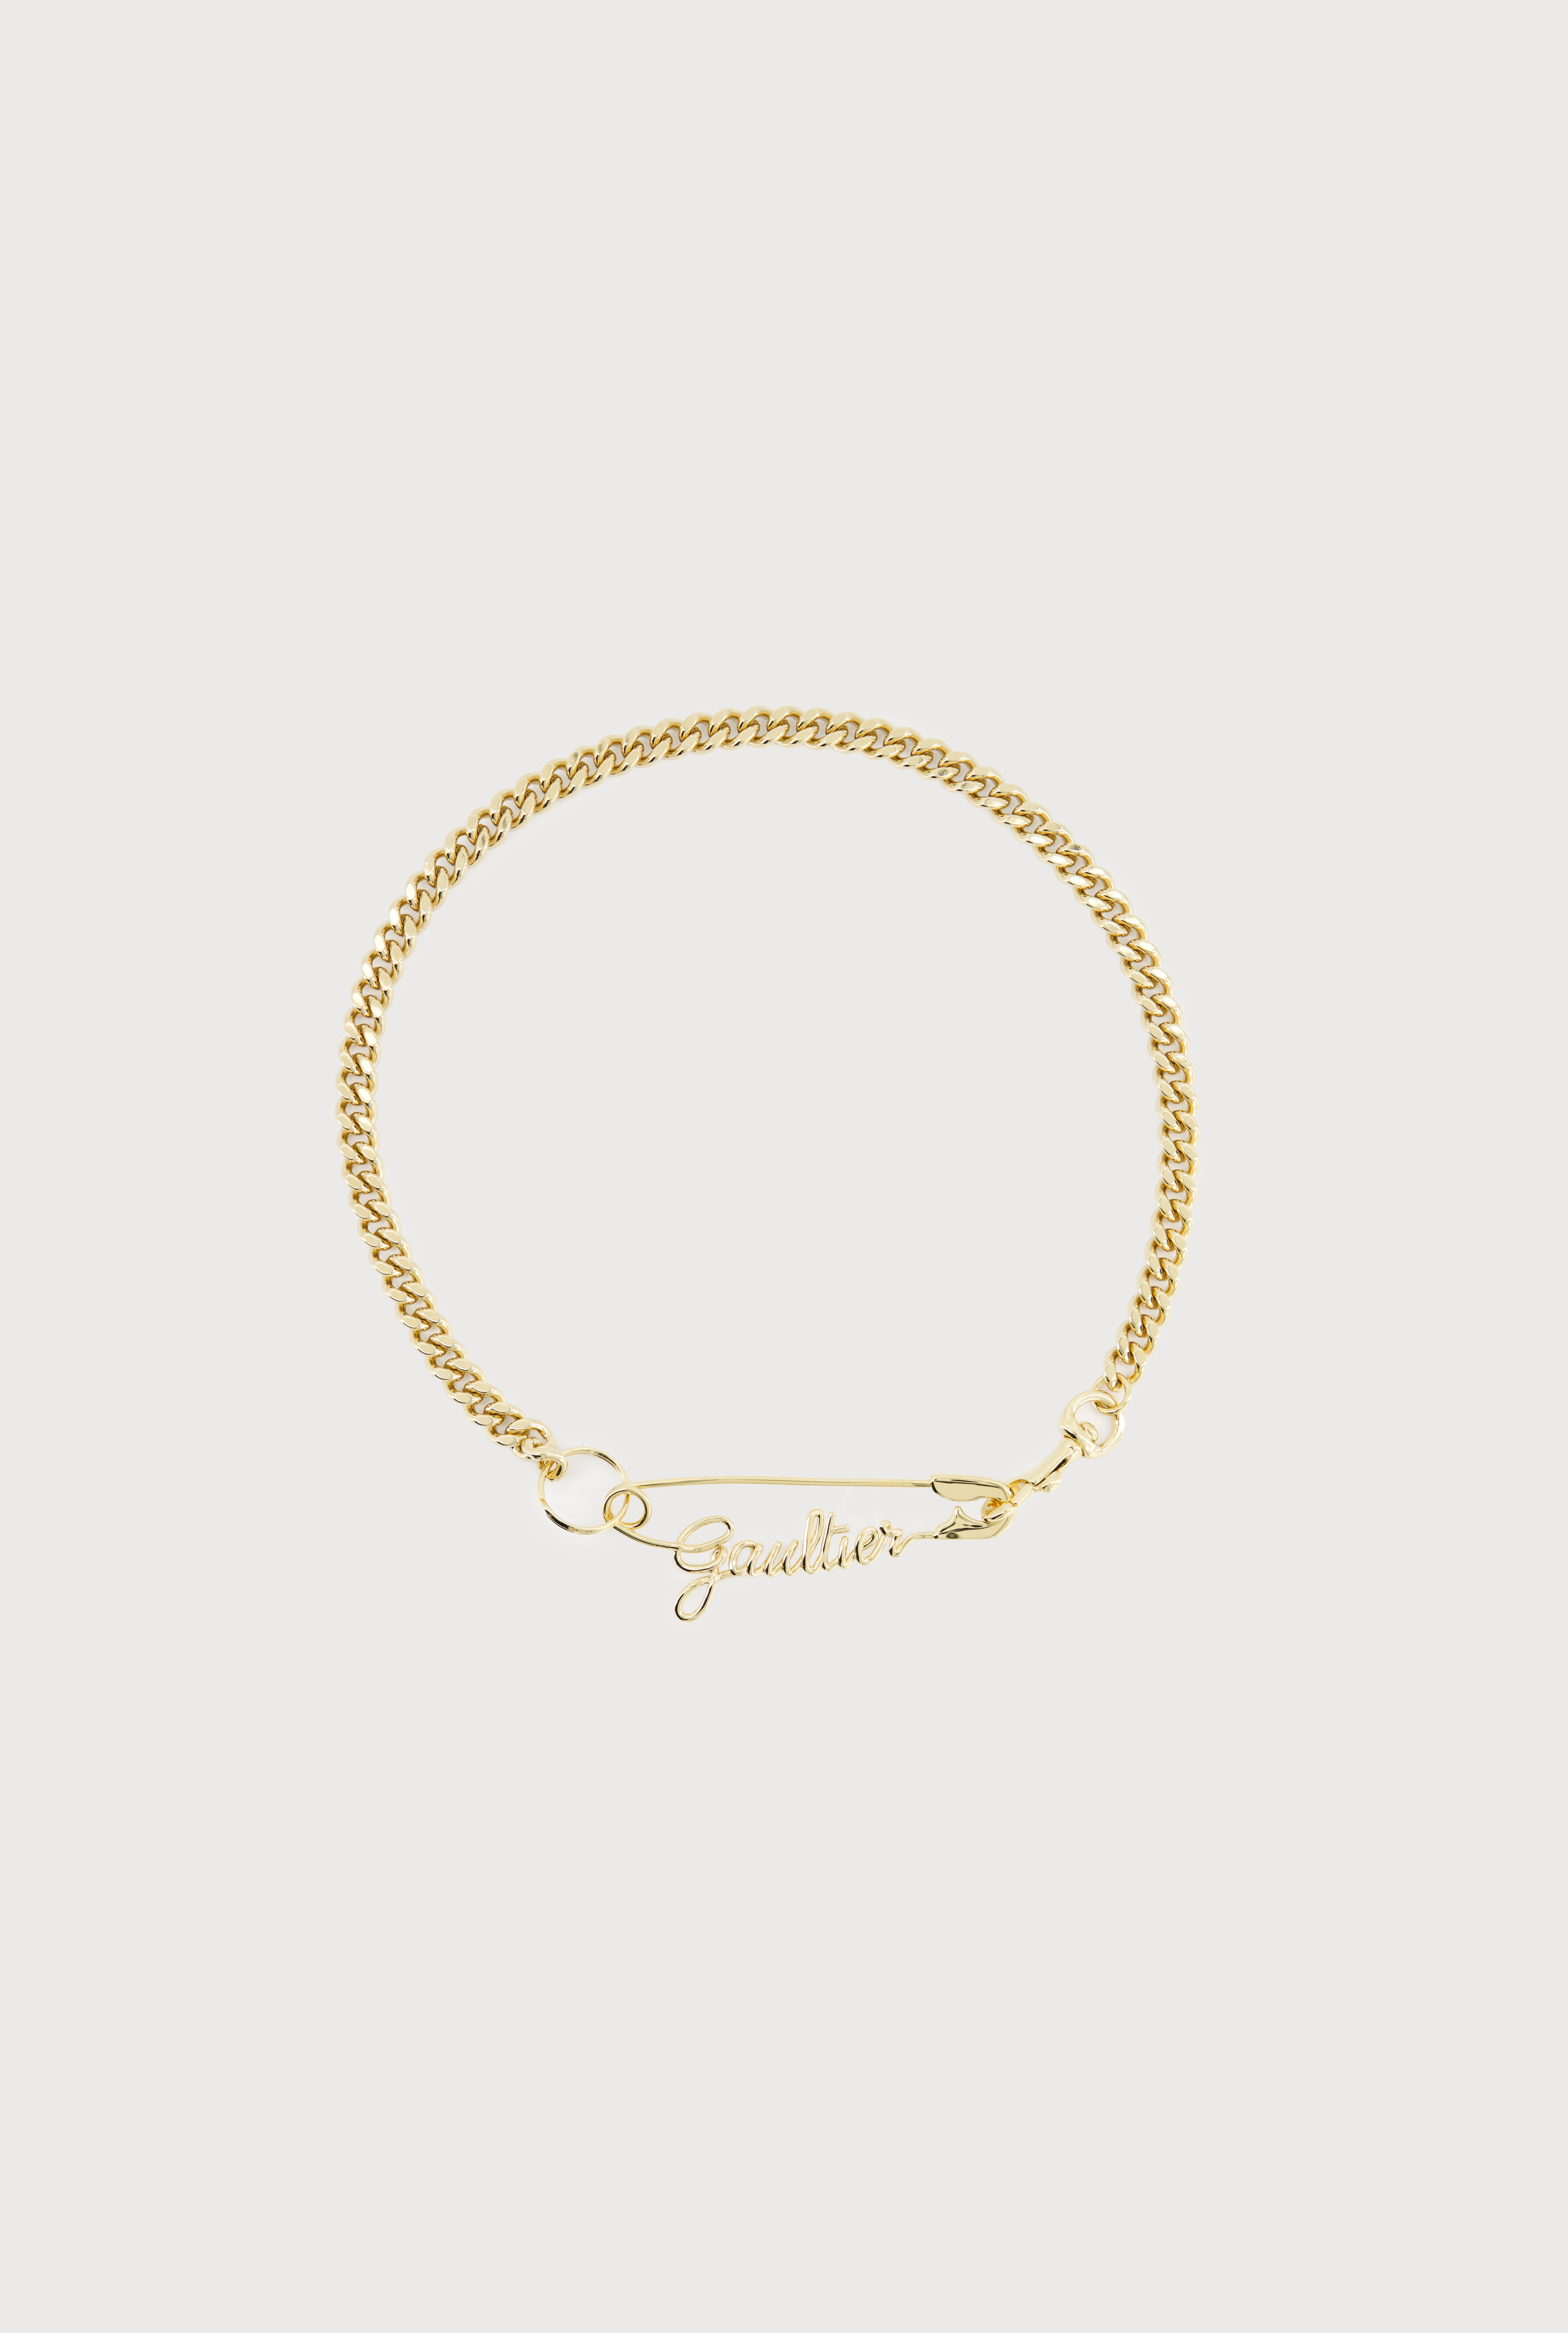 The Gold-Tone Gaultier Safety Pin Necklace